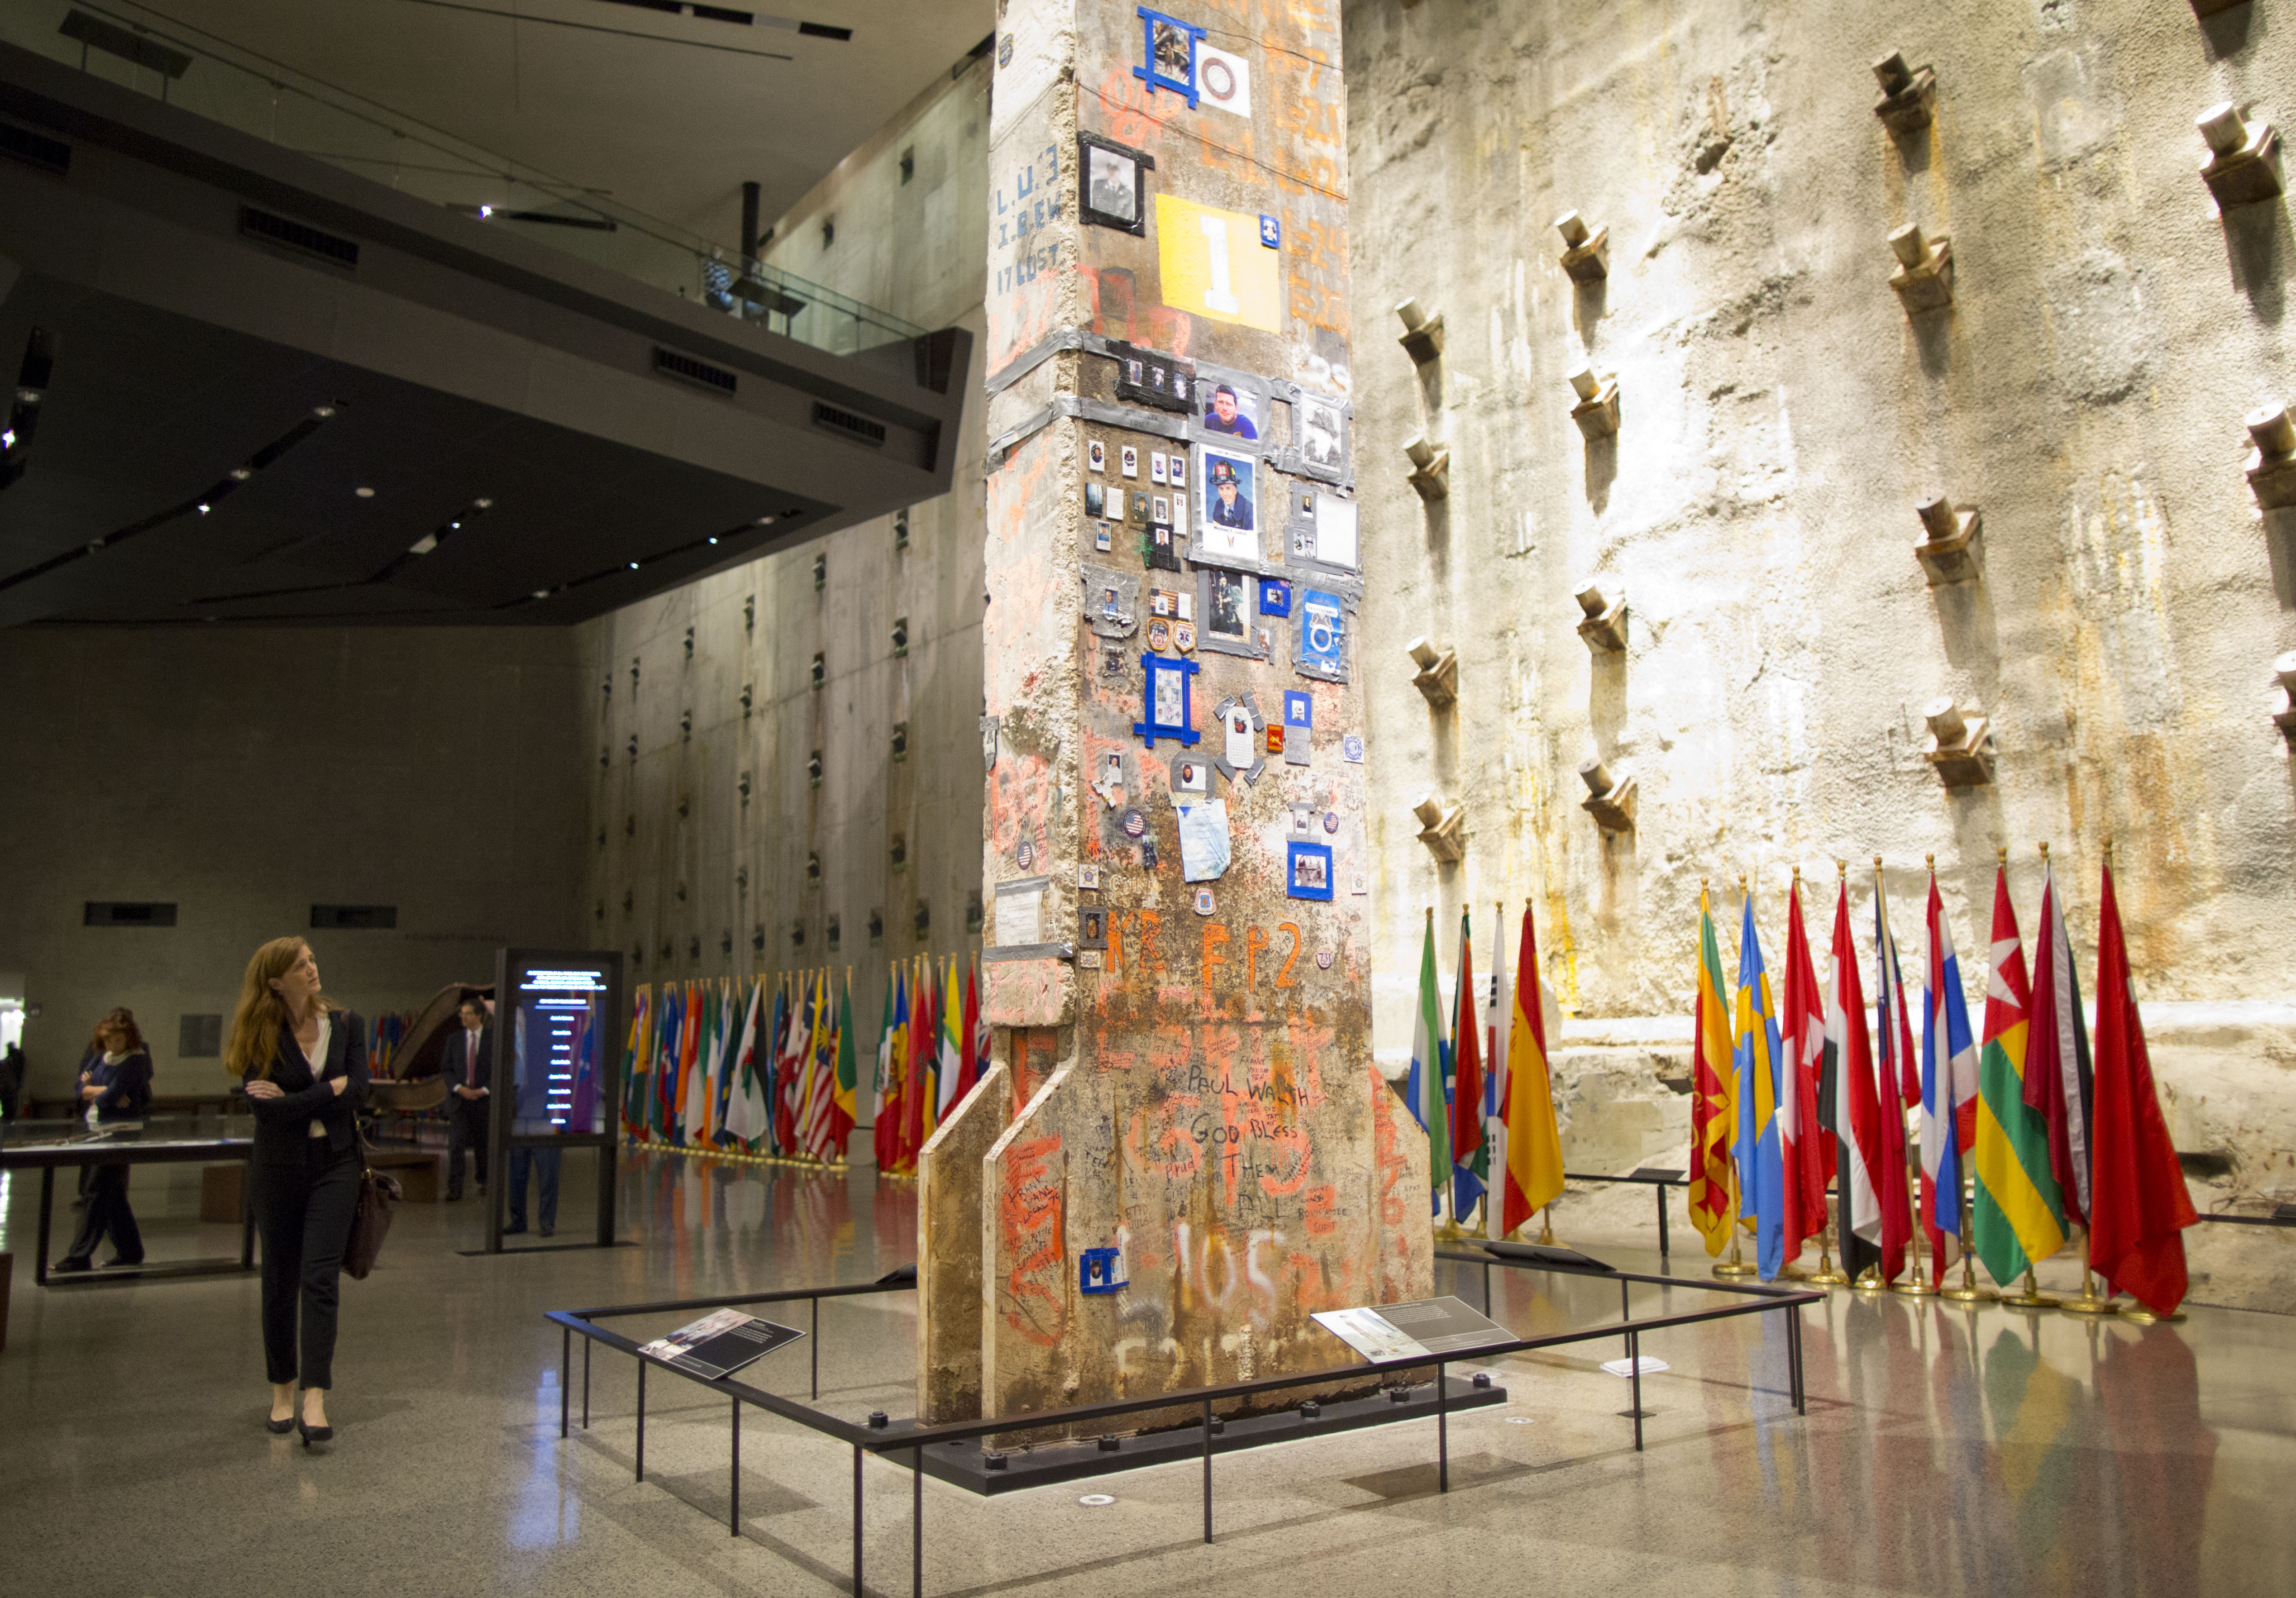 U.S. permanent representative to the United Nations, Samantha Power, views the Last Column in the Museum. Surrounding her are flags to honor the individuals from more than 90 countries who died on 9/11.